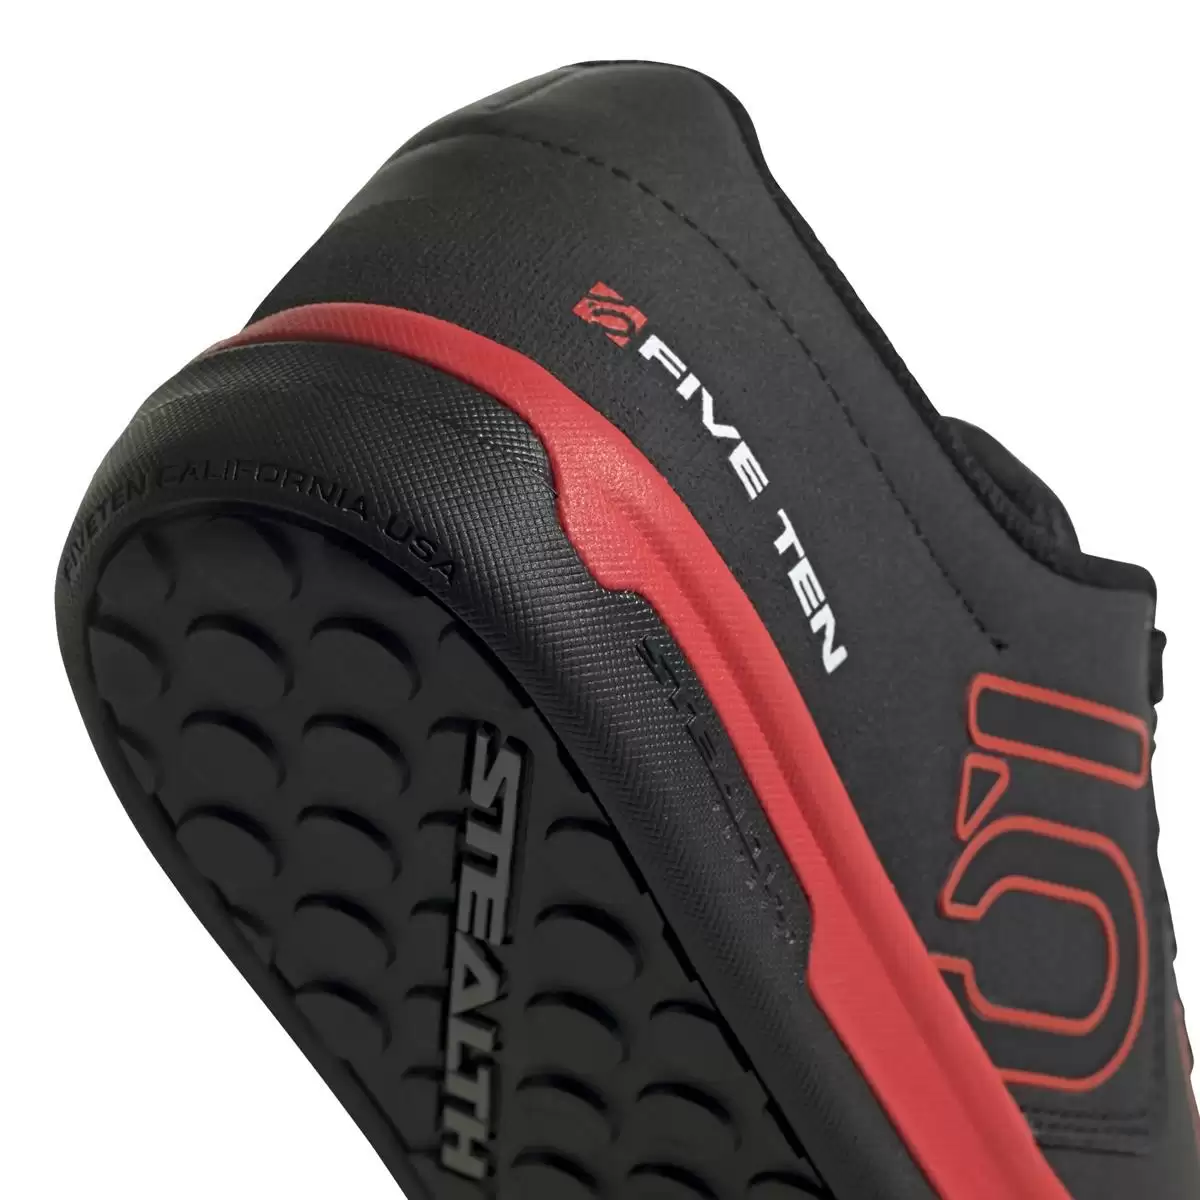 MTB Flat Shoes Freerider Pro Black/Red Size 49 #5